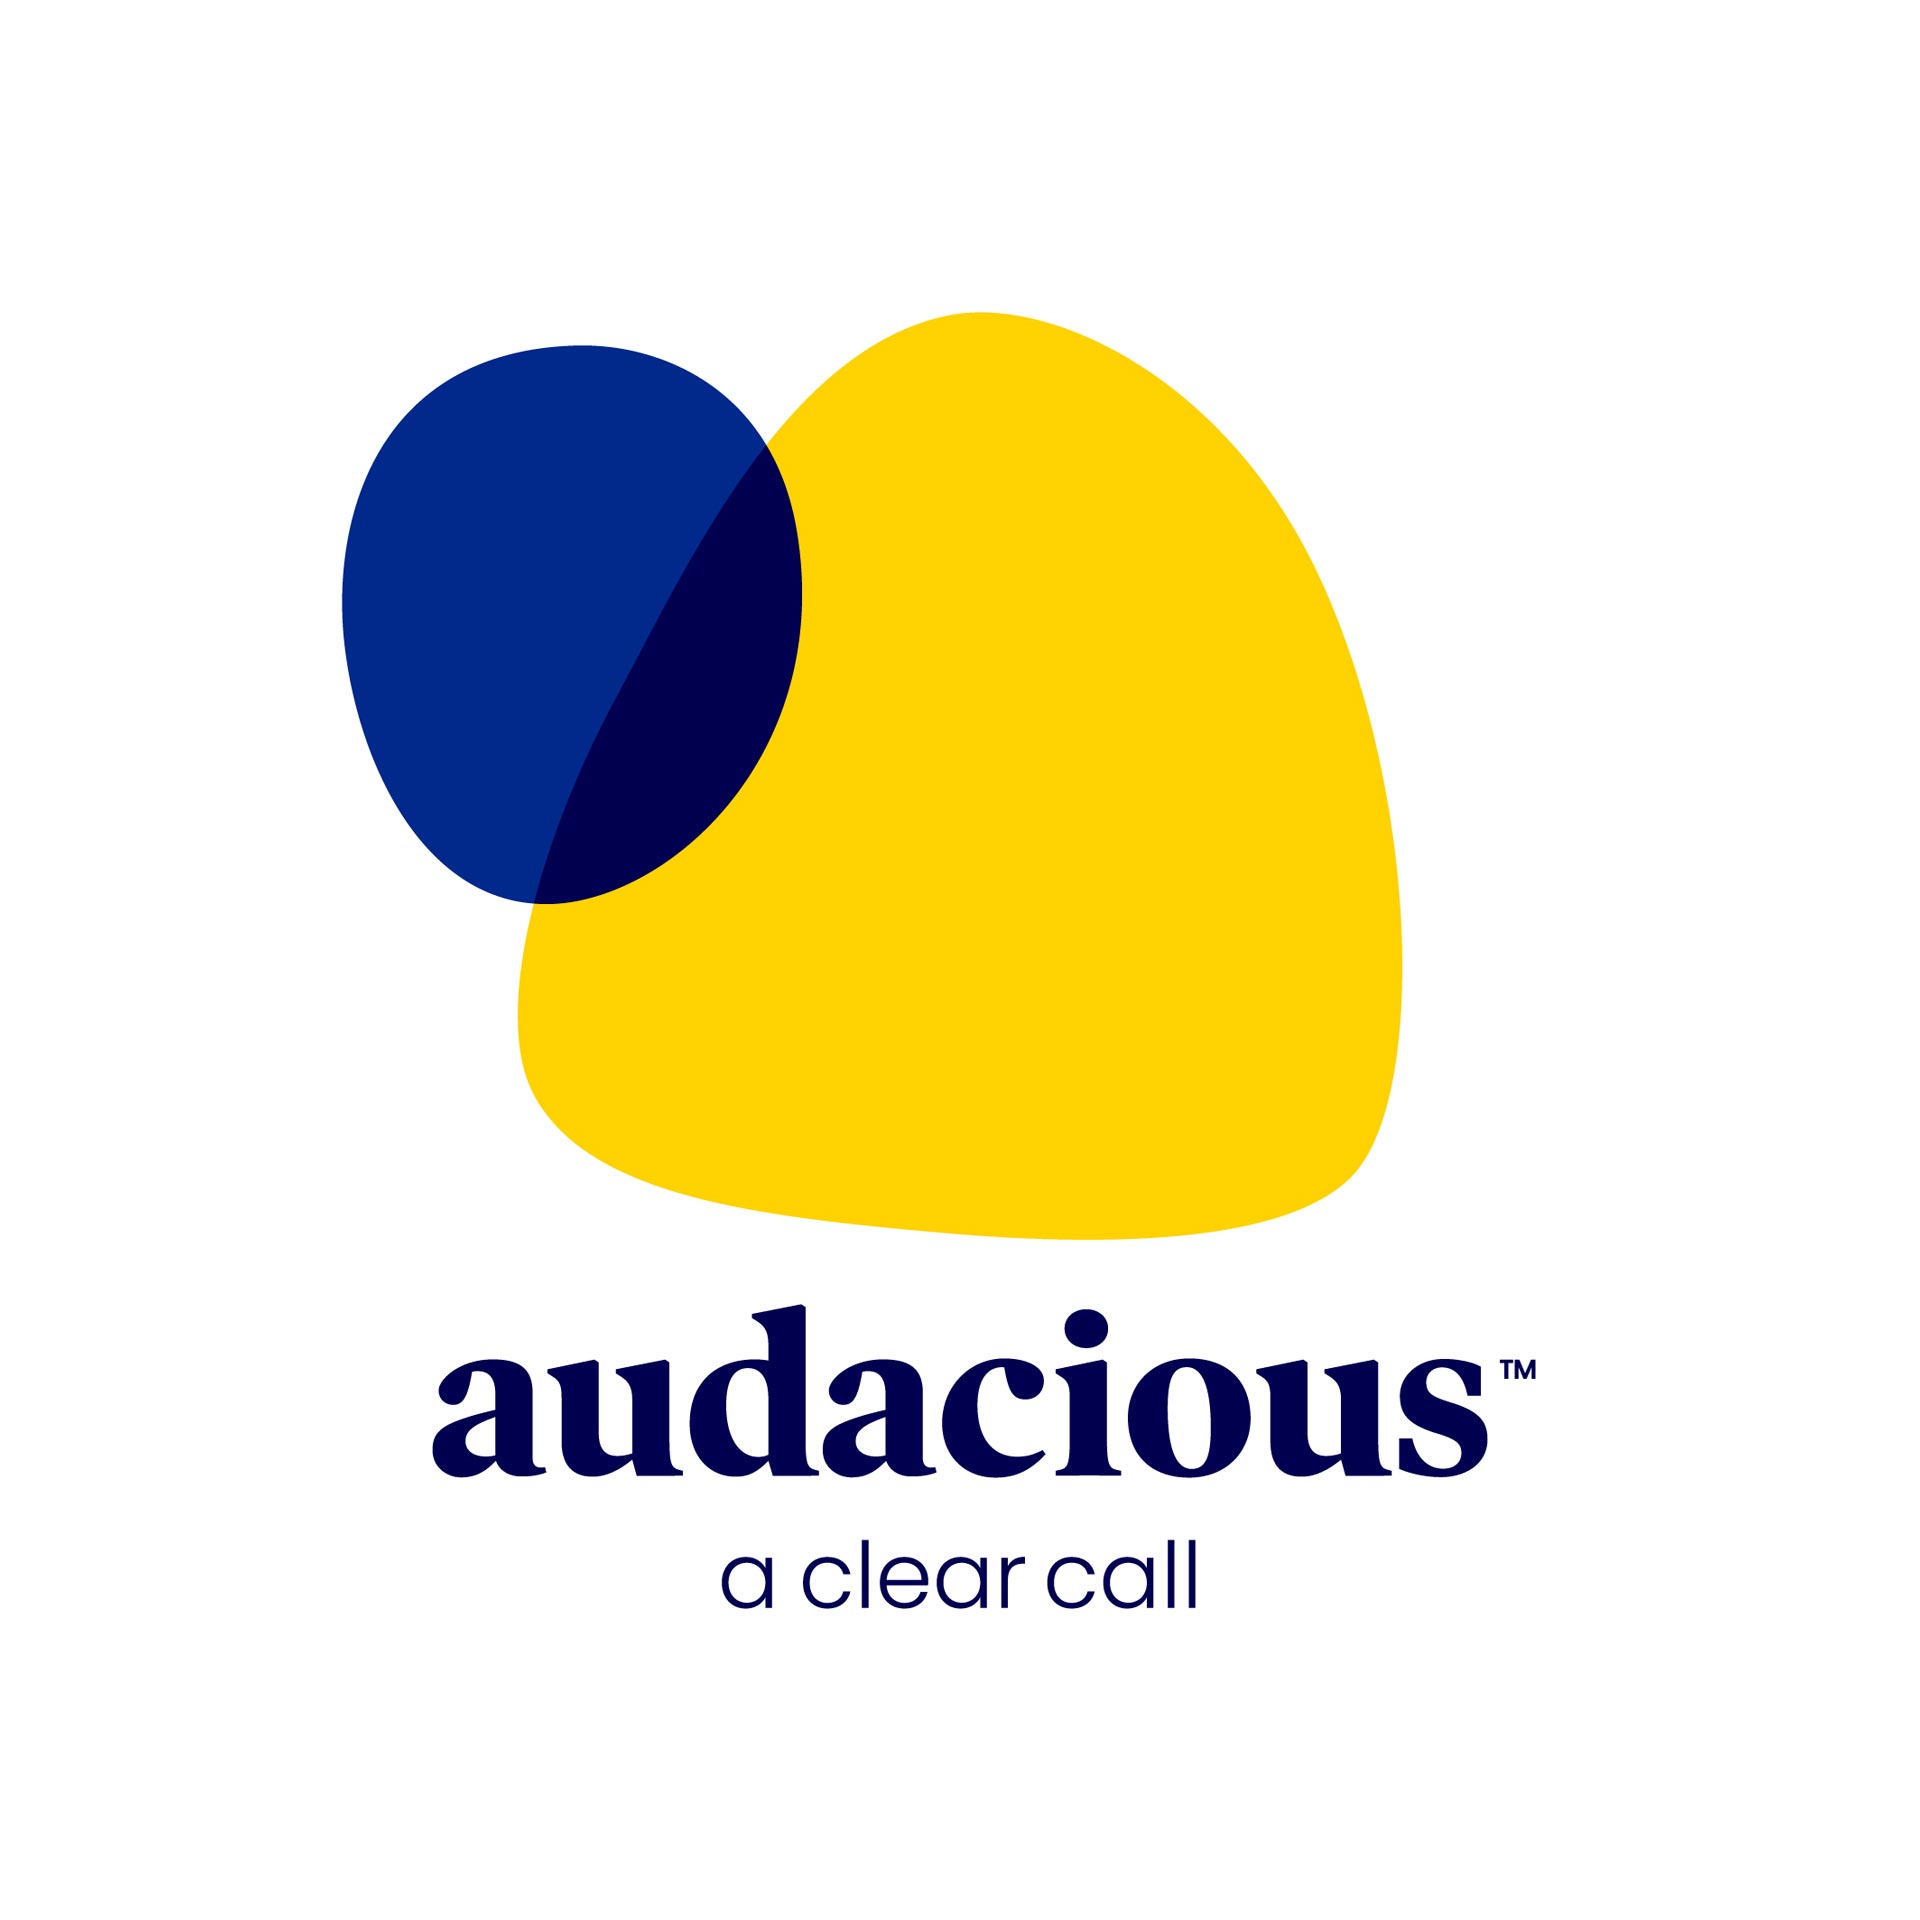 Inclusive Identity: Silas Amos | Design Thought for Audacious